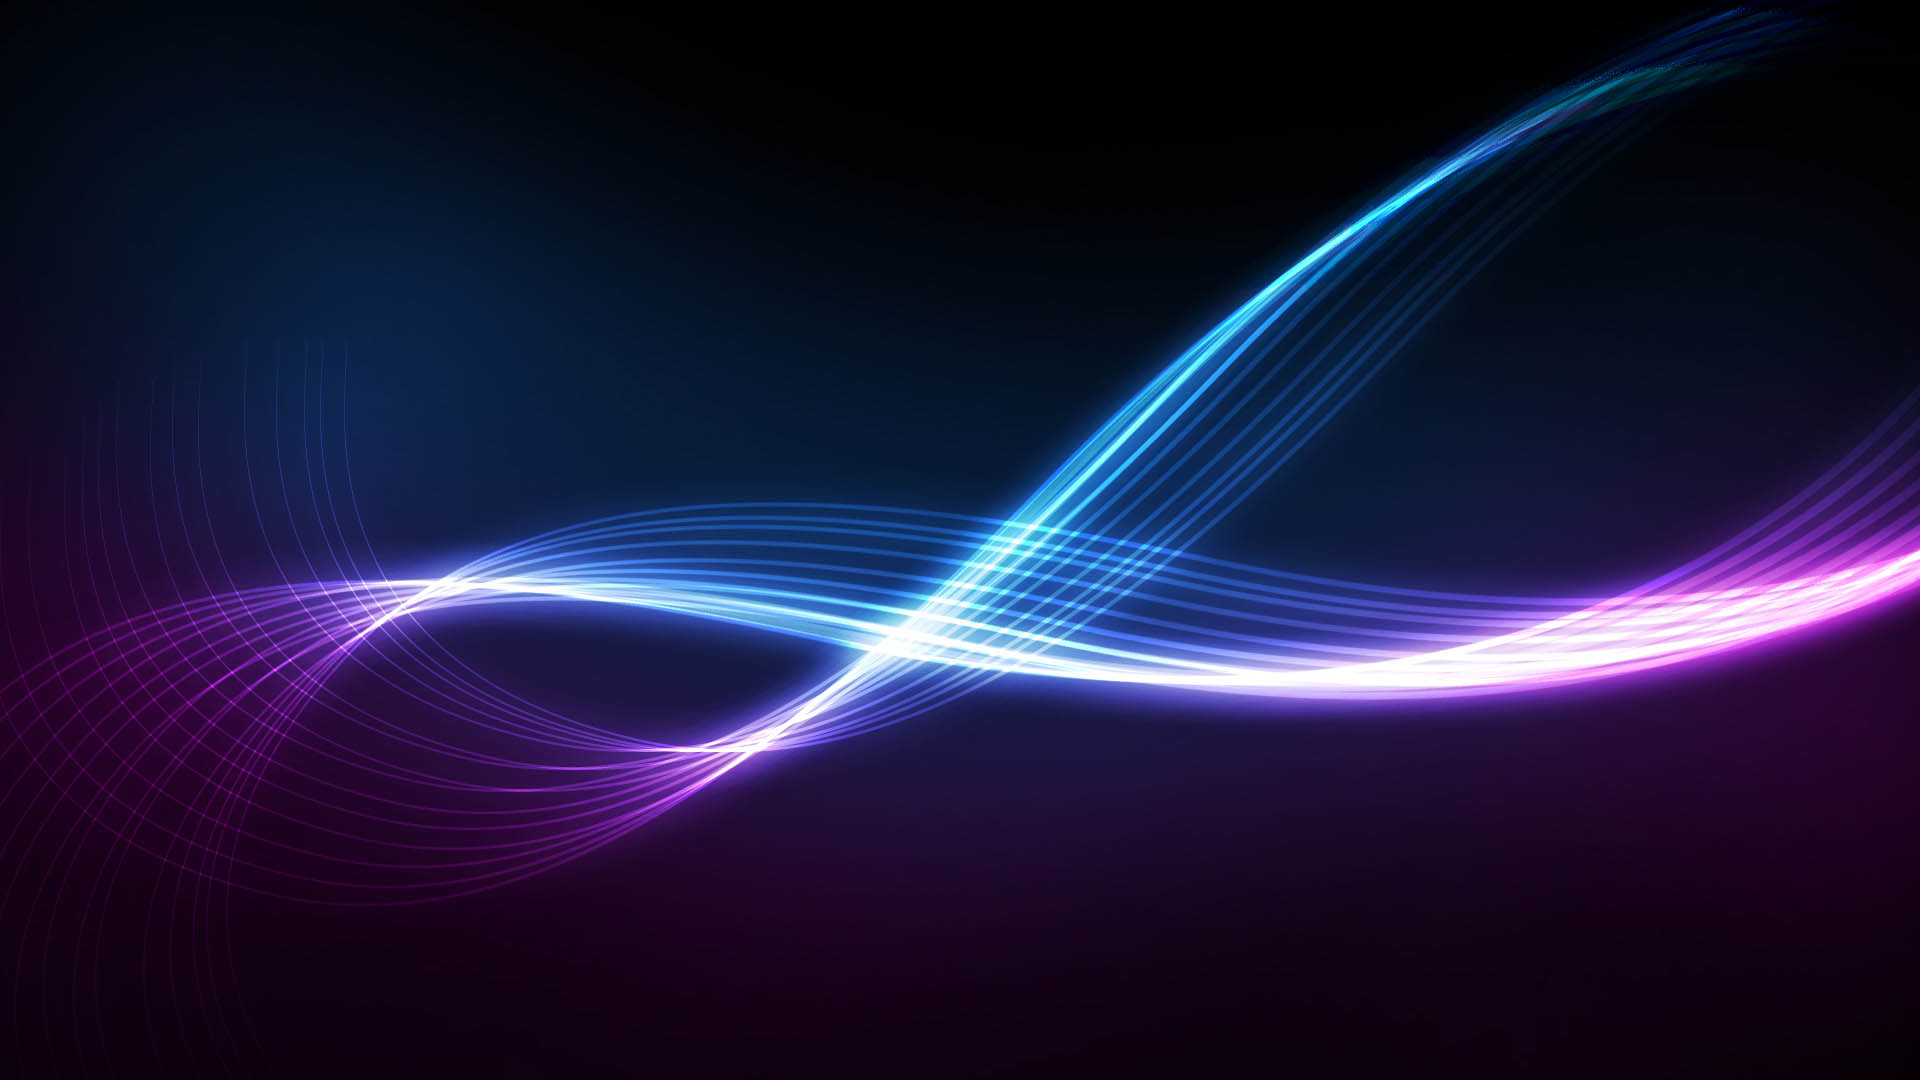 Wallpaper Desktop Abstract HD In Others Imageci